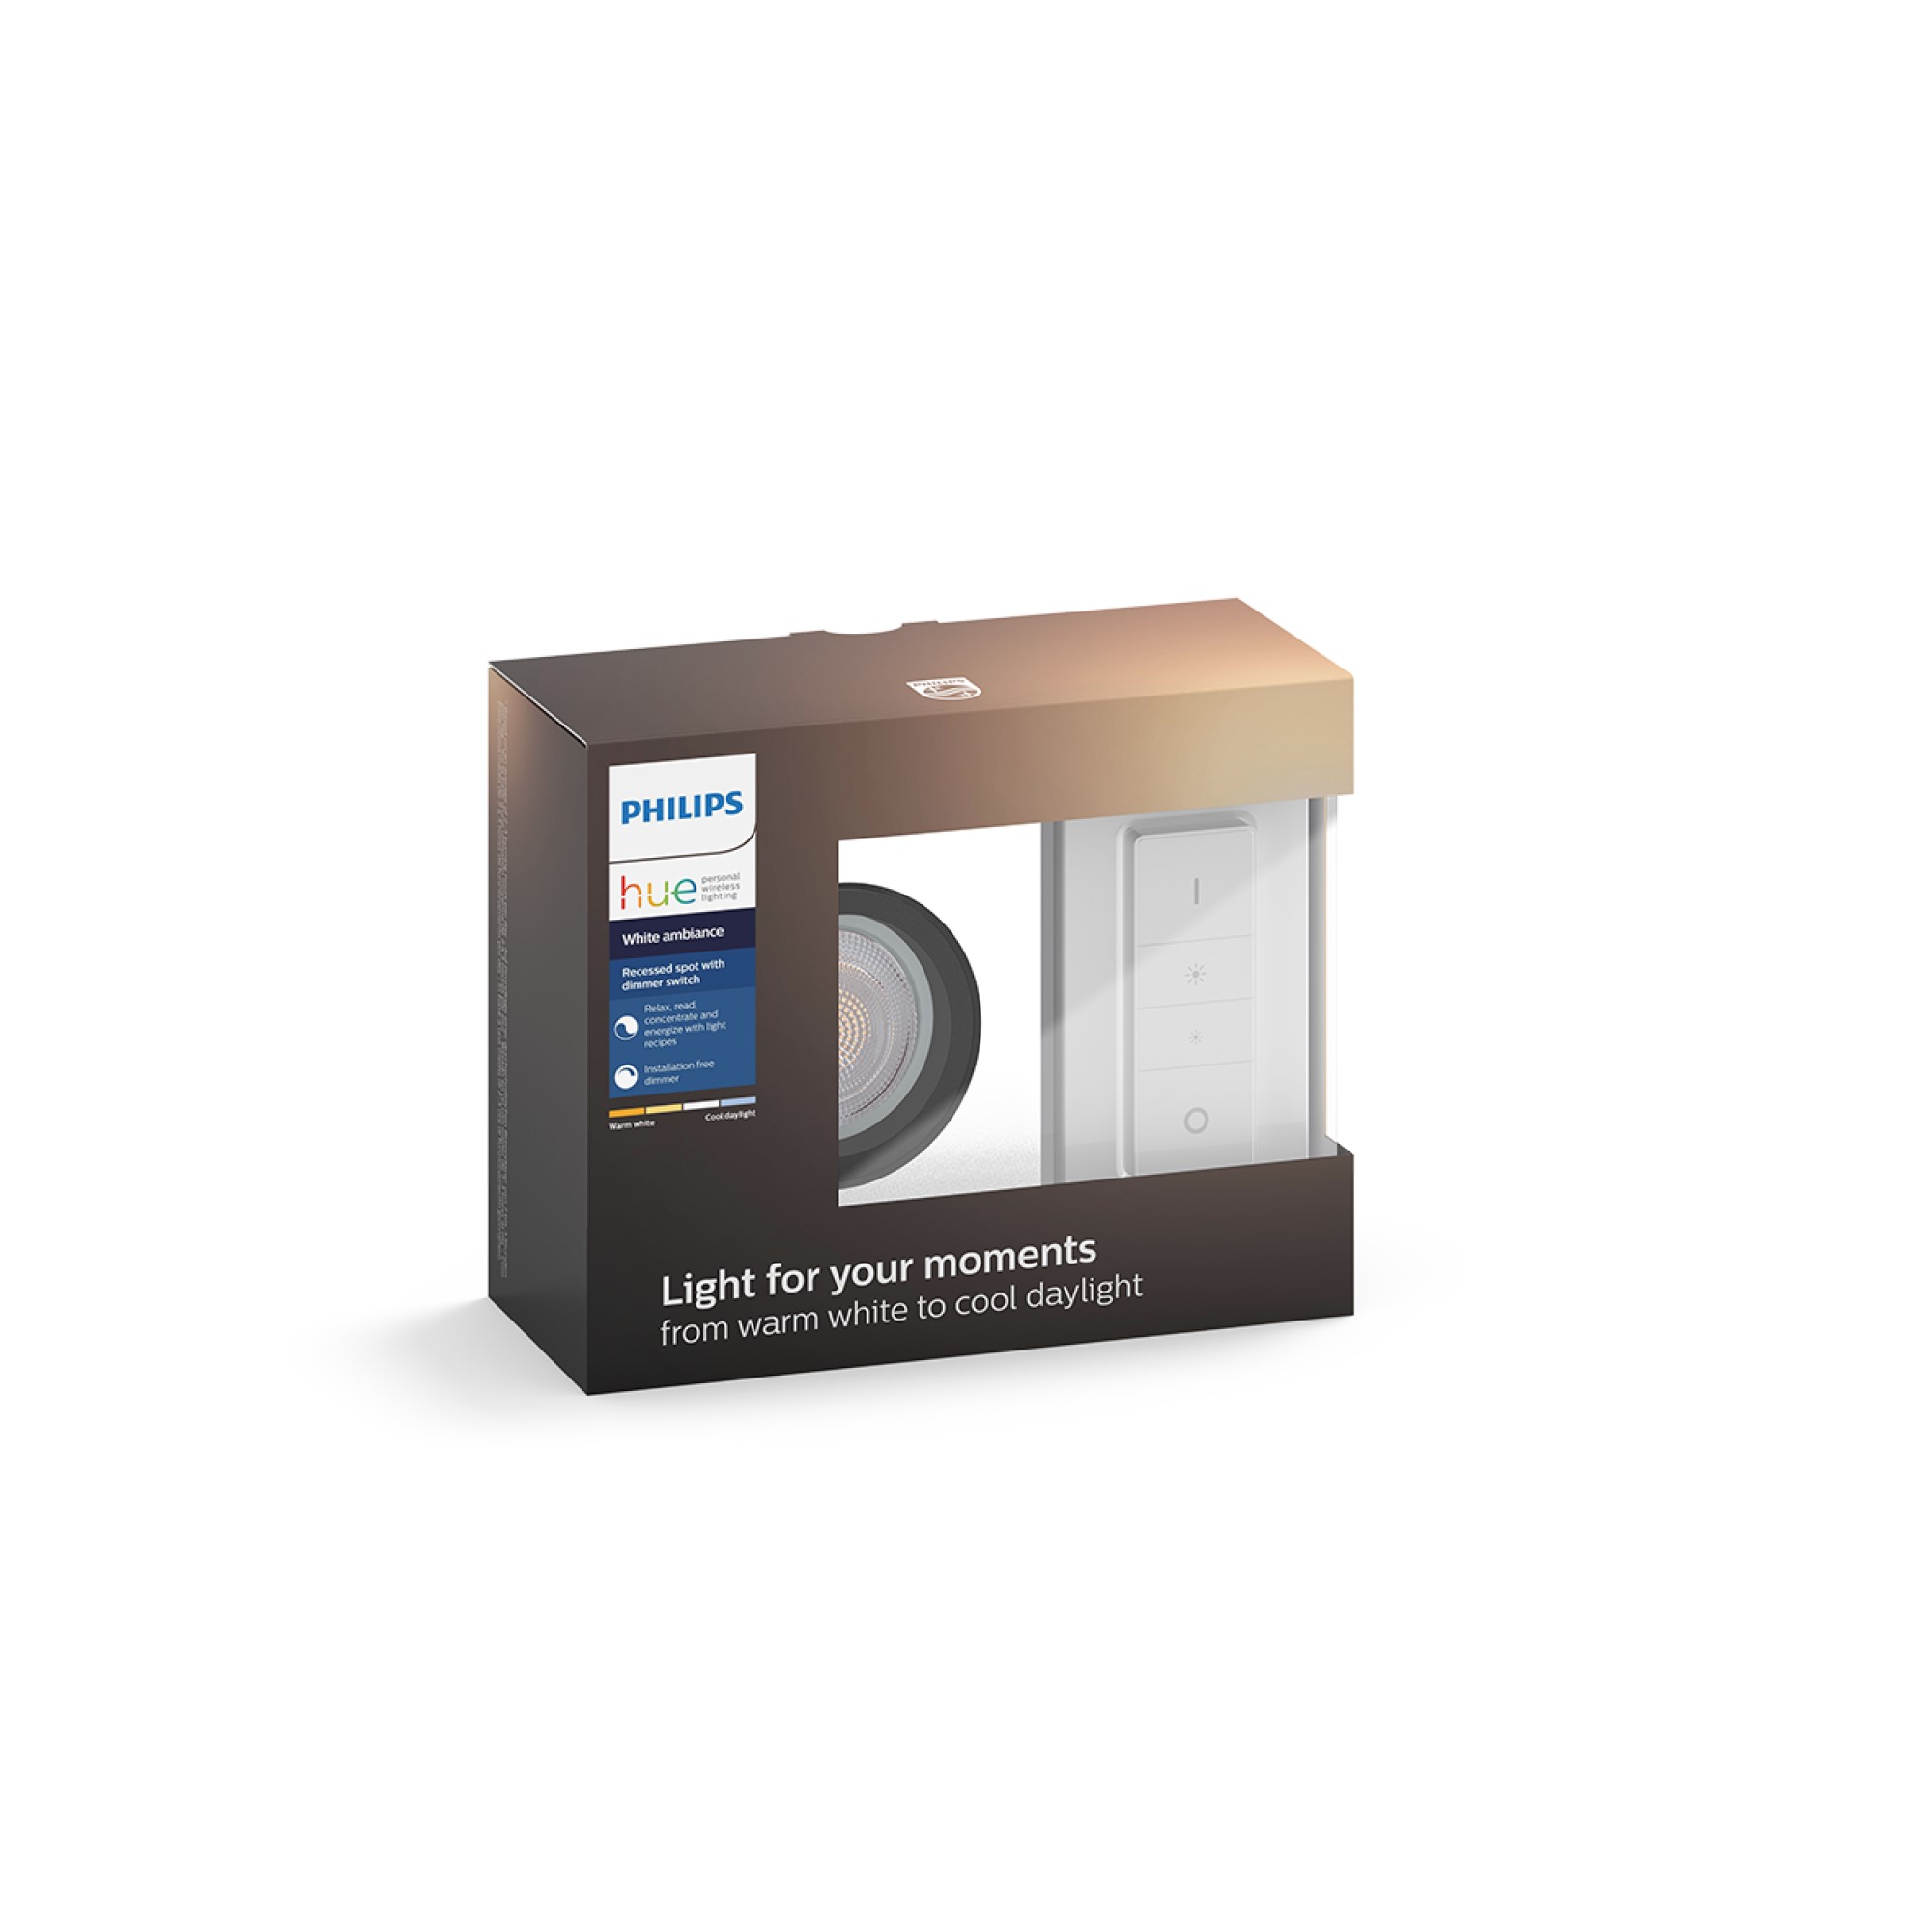 Philips Hue White Ambiance Milliskin LED Downlight square, silver, 250lm, with Dimmer Switch